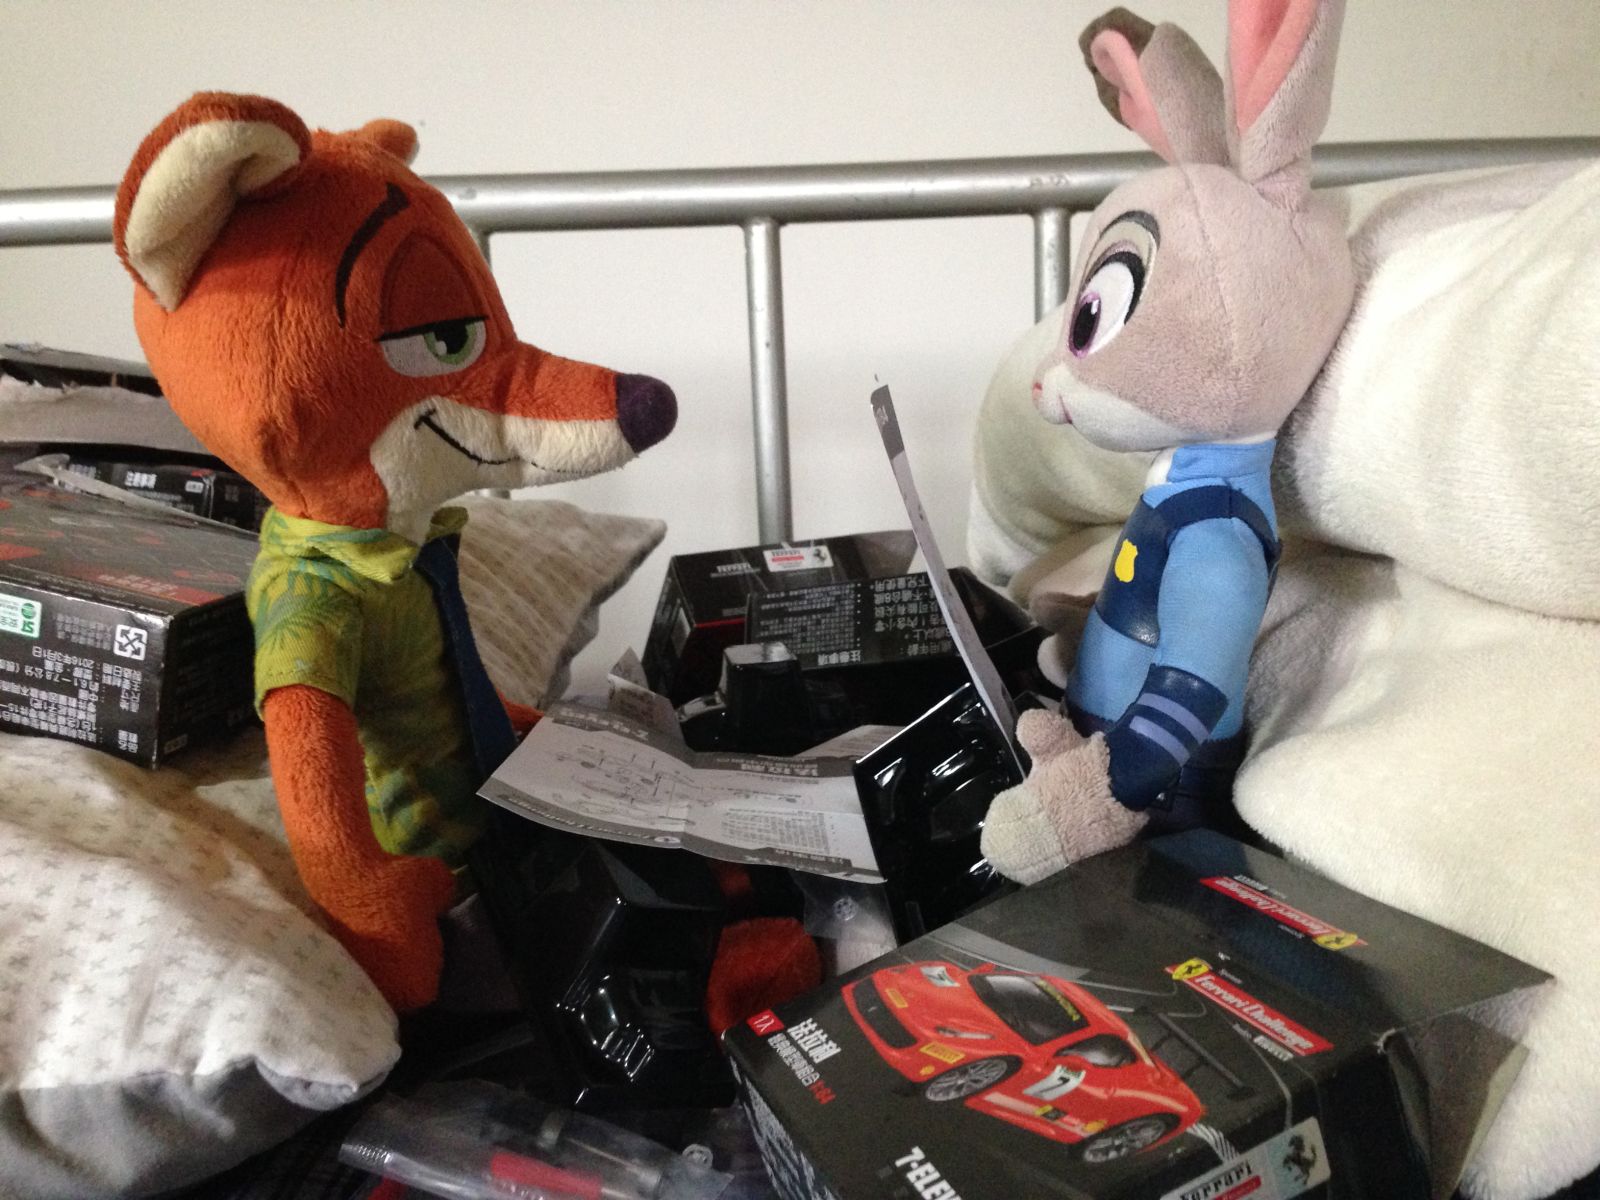 Judy try to read the instruction, good luck Carrots!